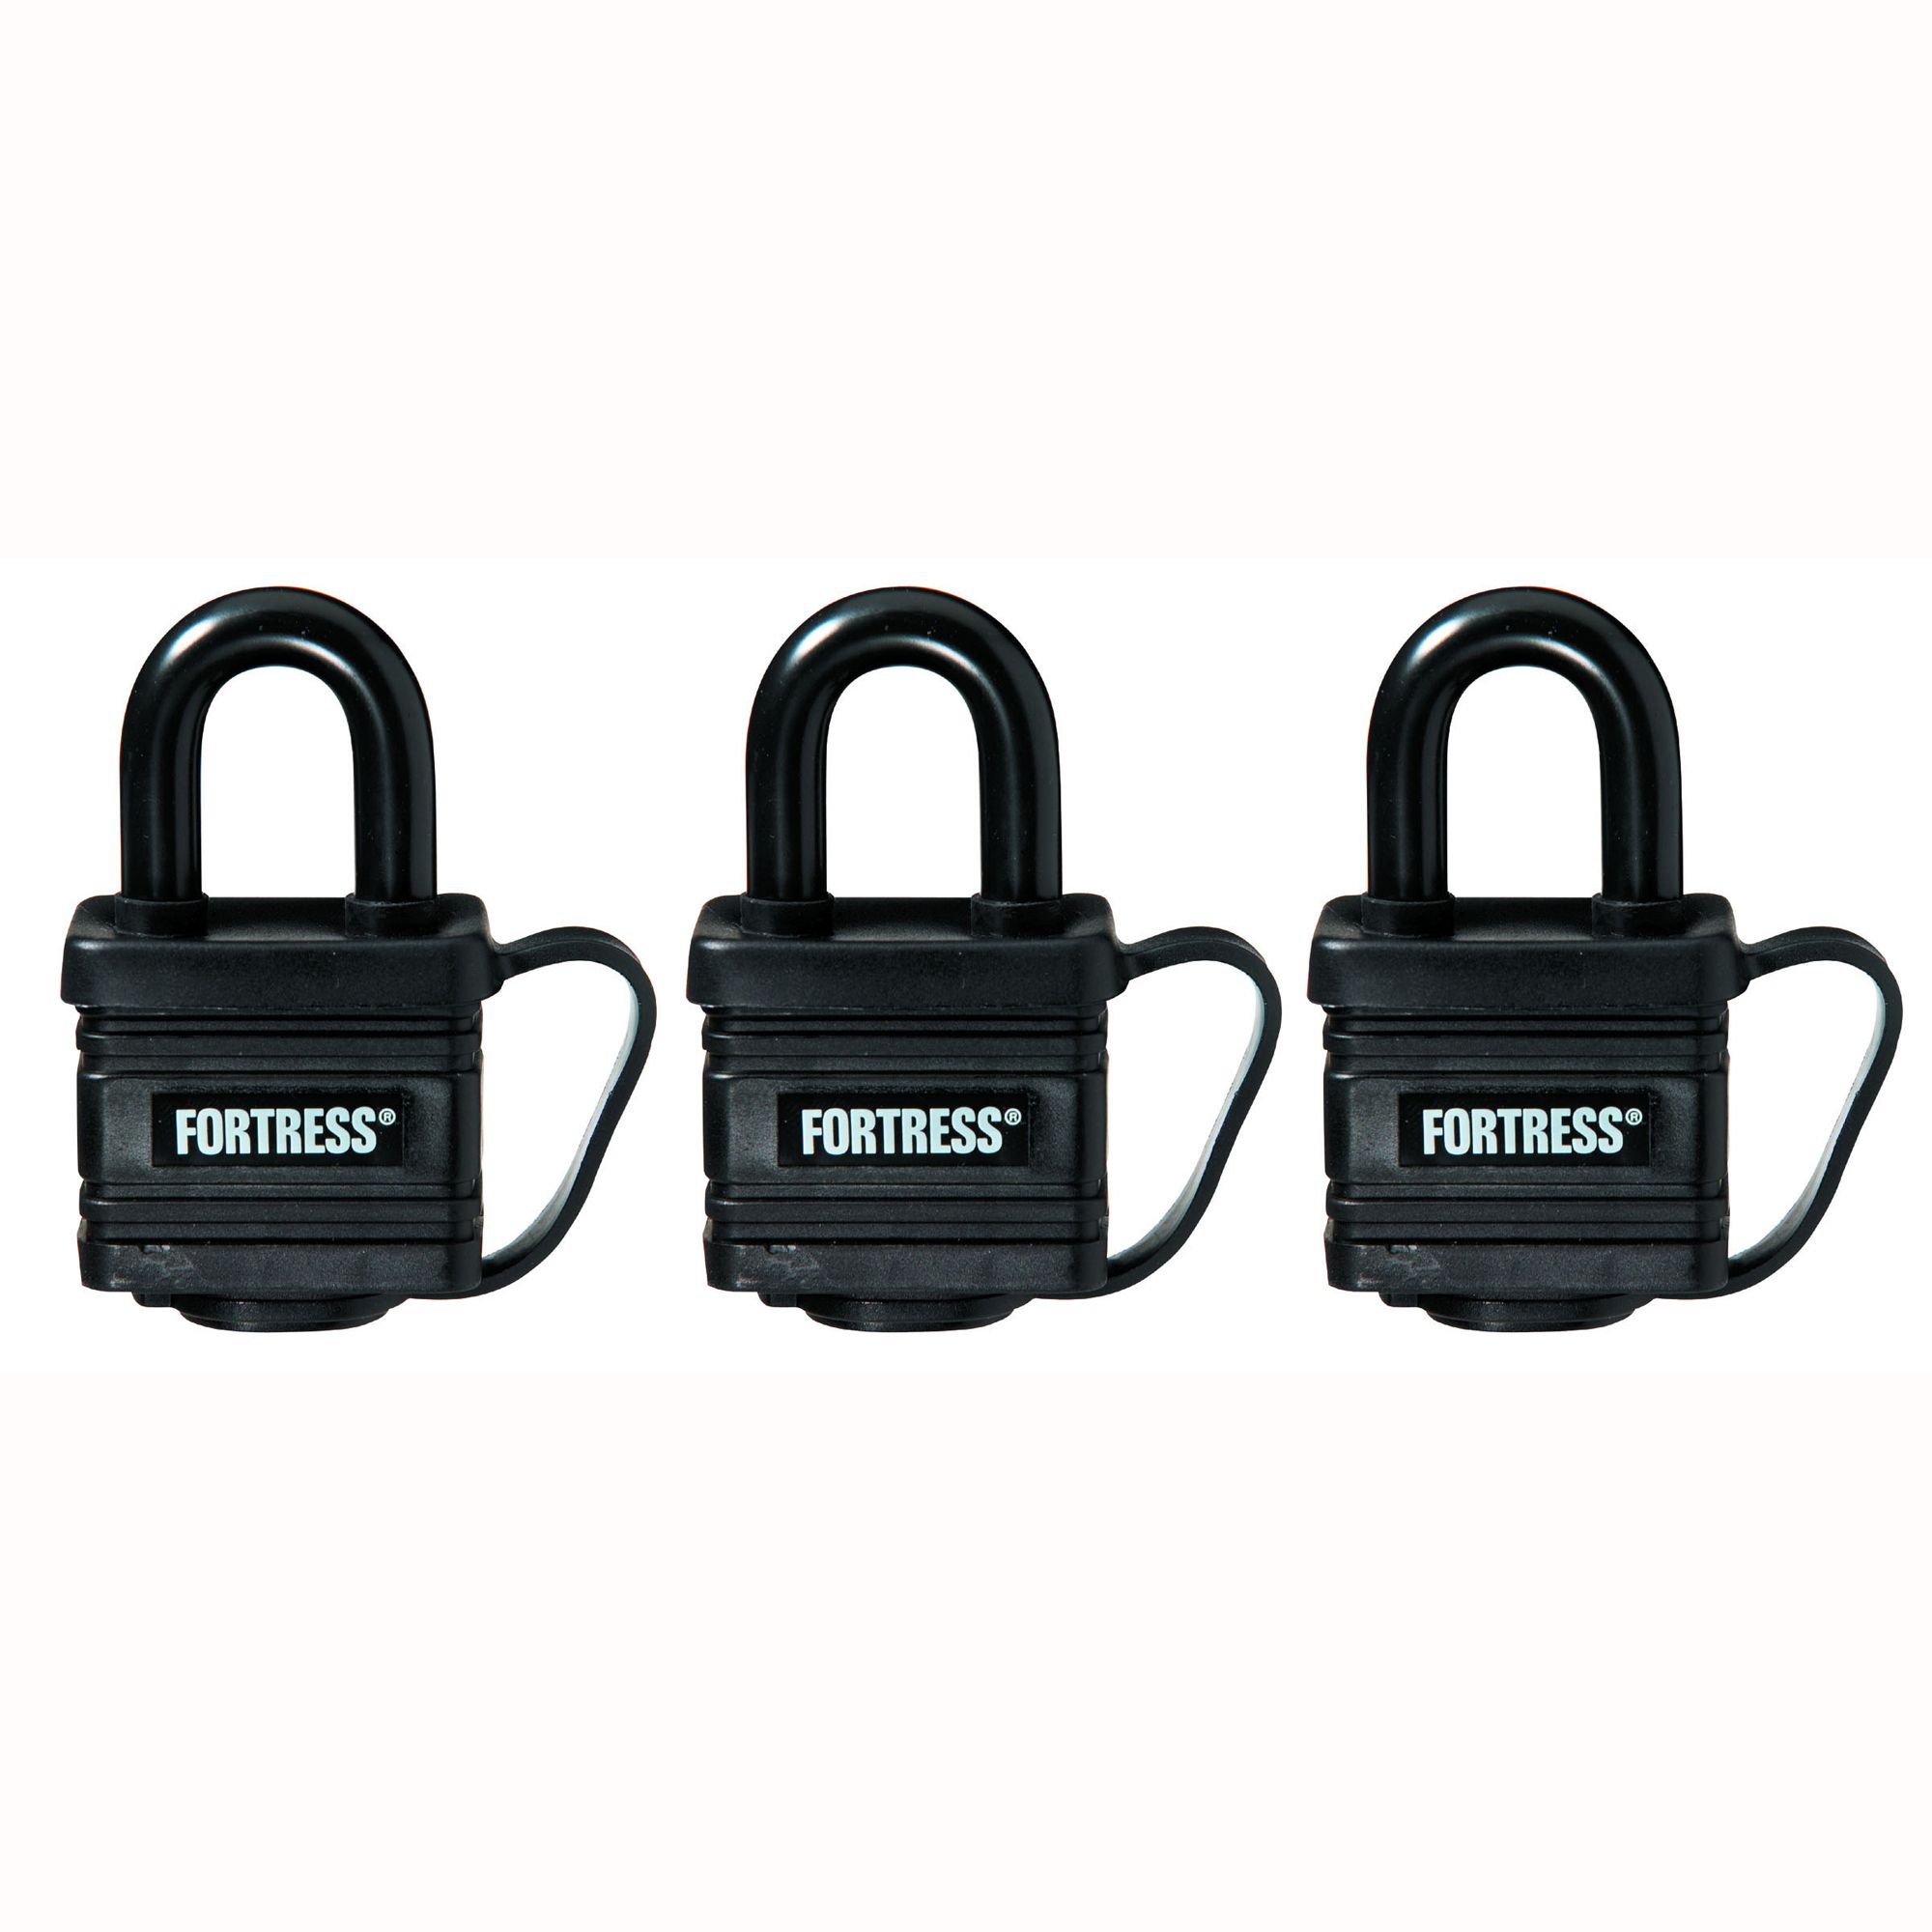 Fortress Covered Laminated Steel Padlock 3 Pack